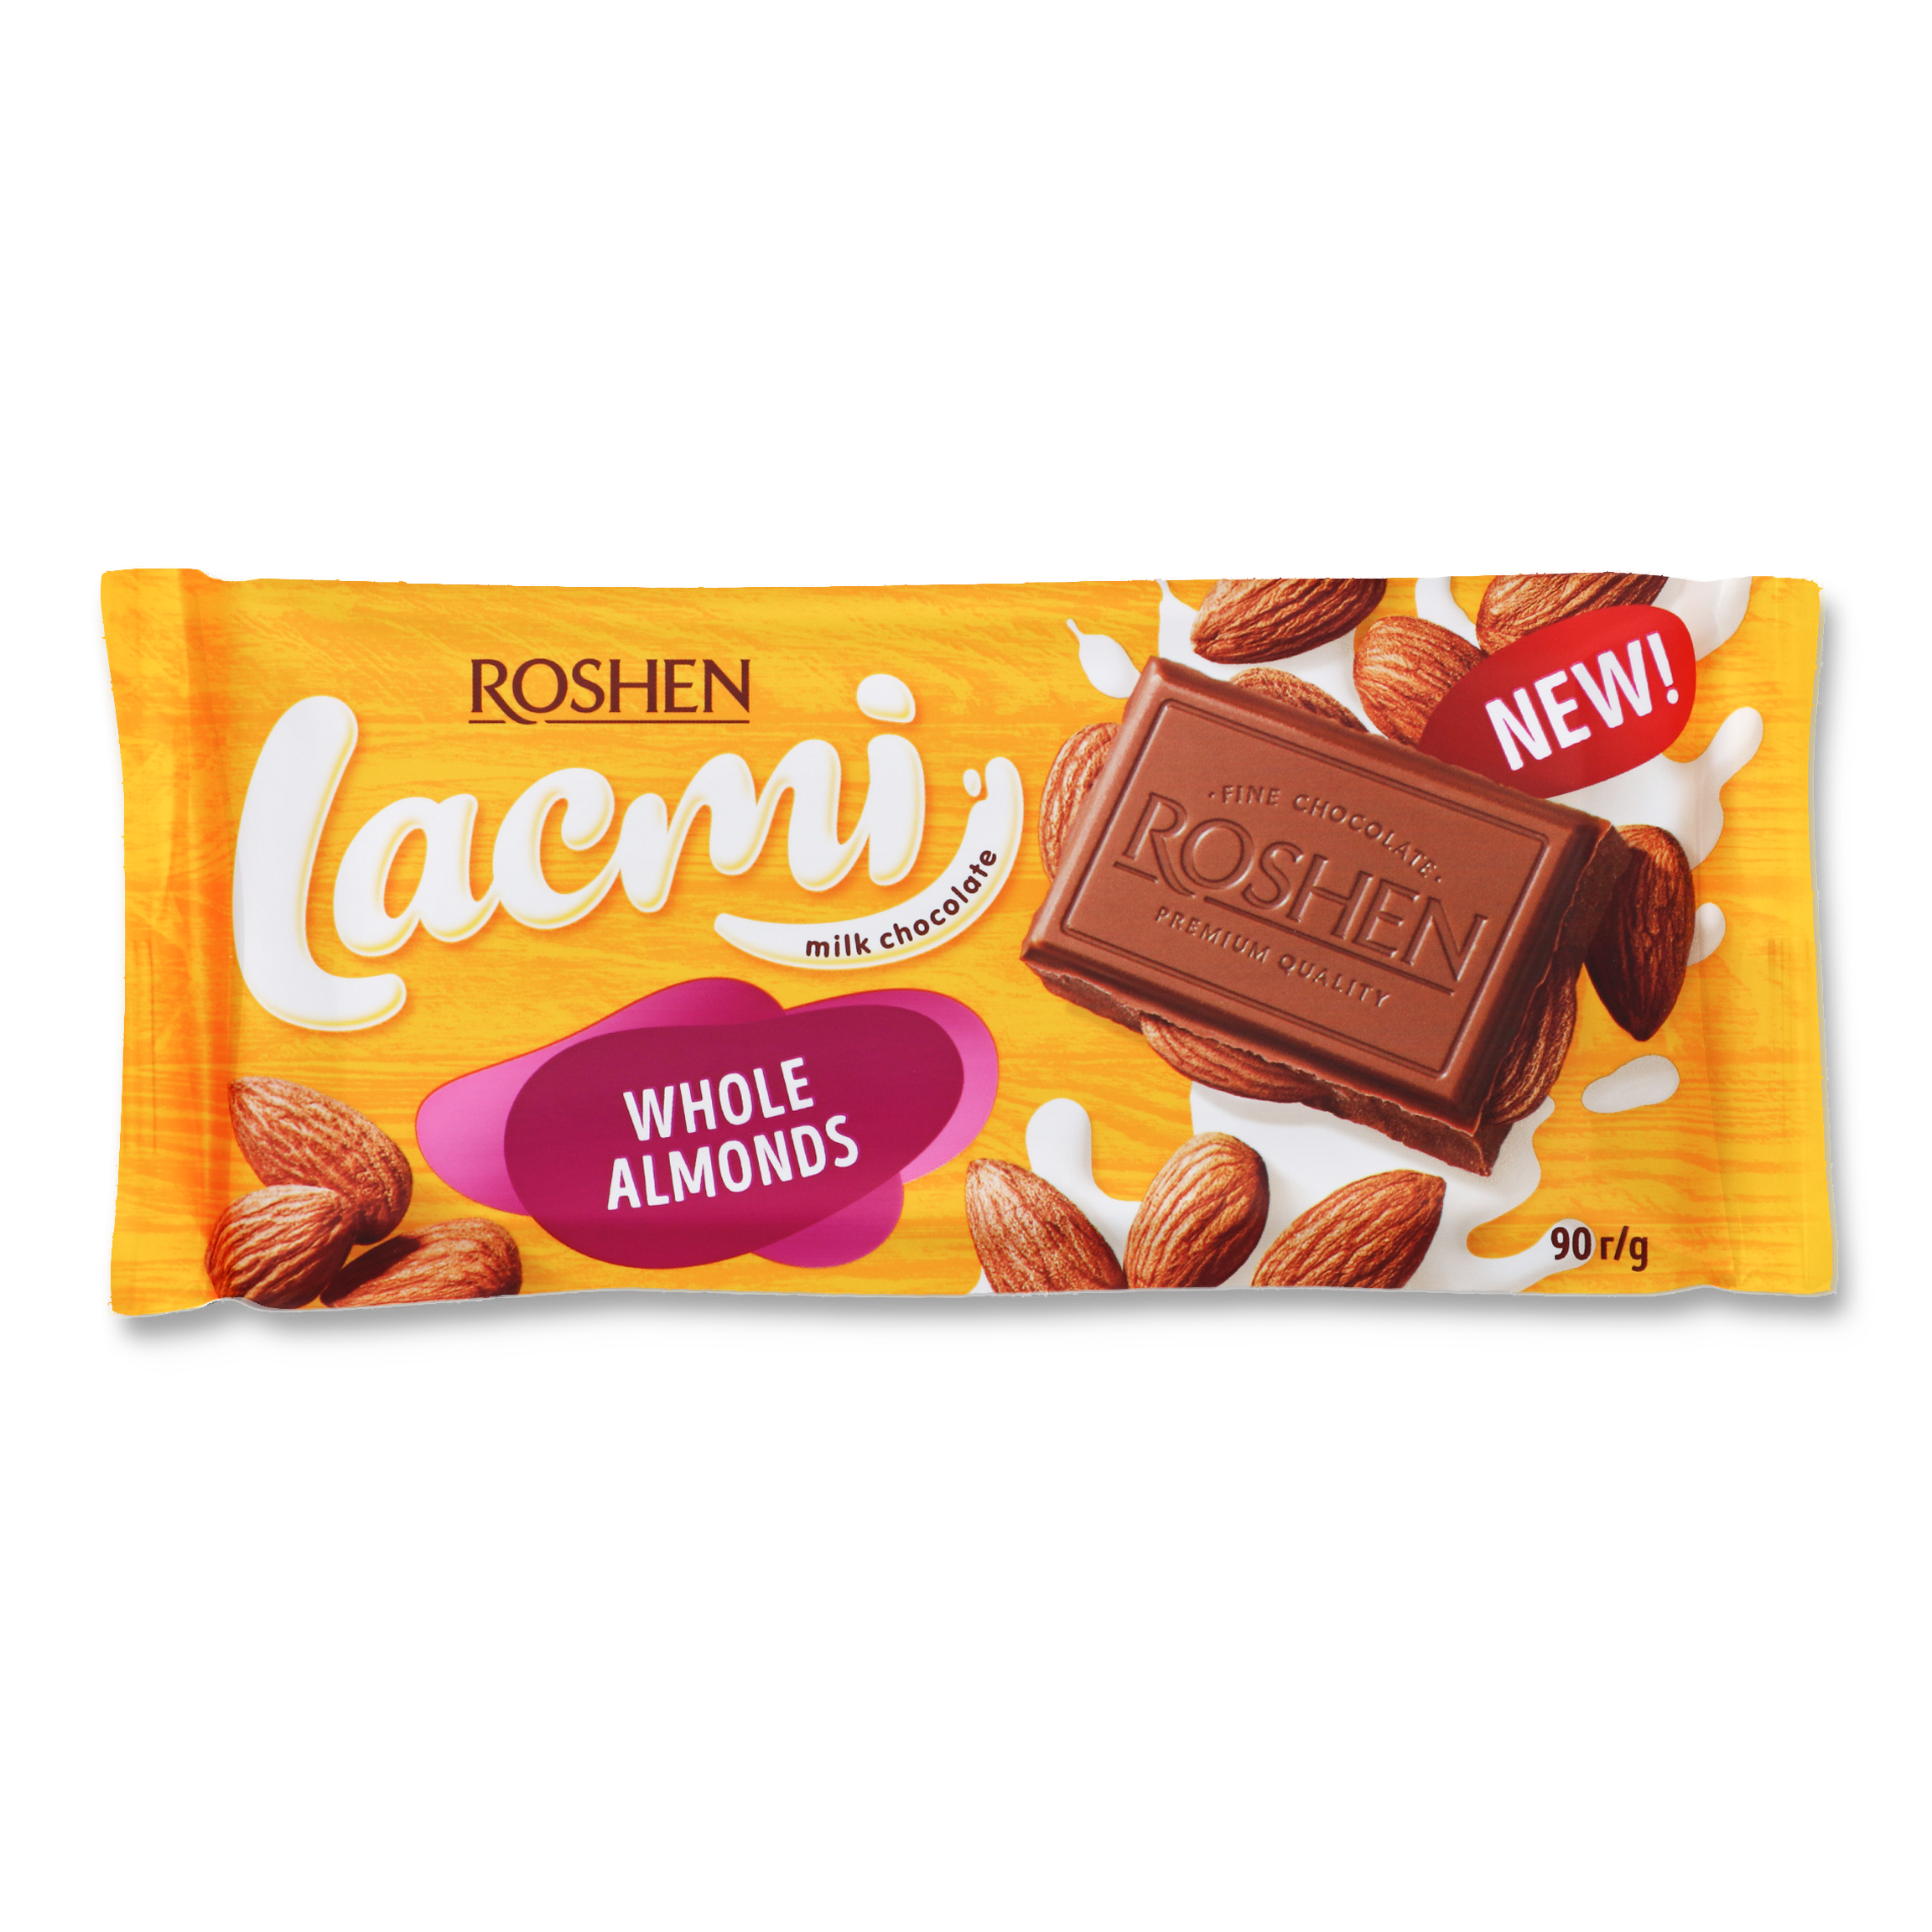 Roshen Milk Chocolate with Whole Almonds 90g